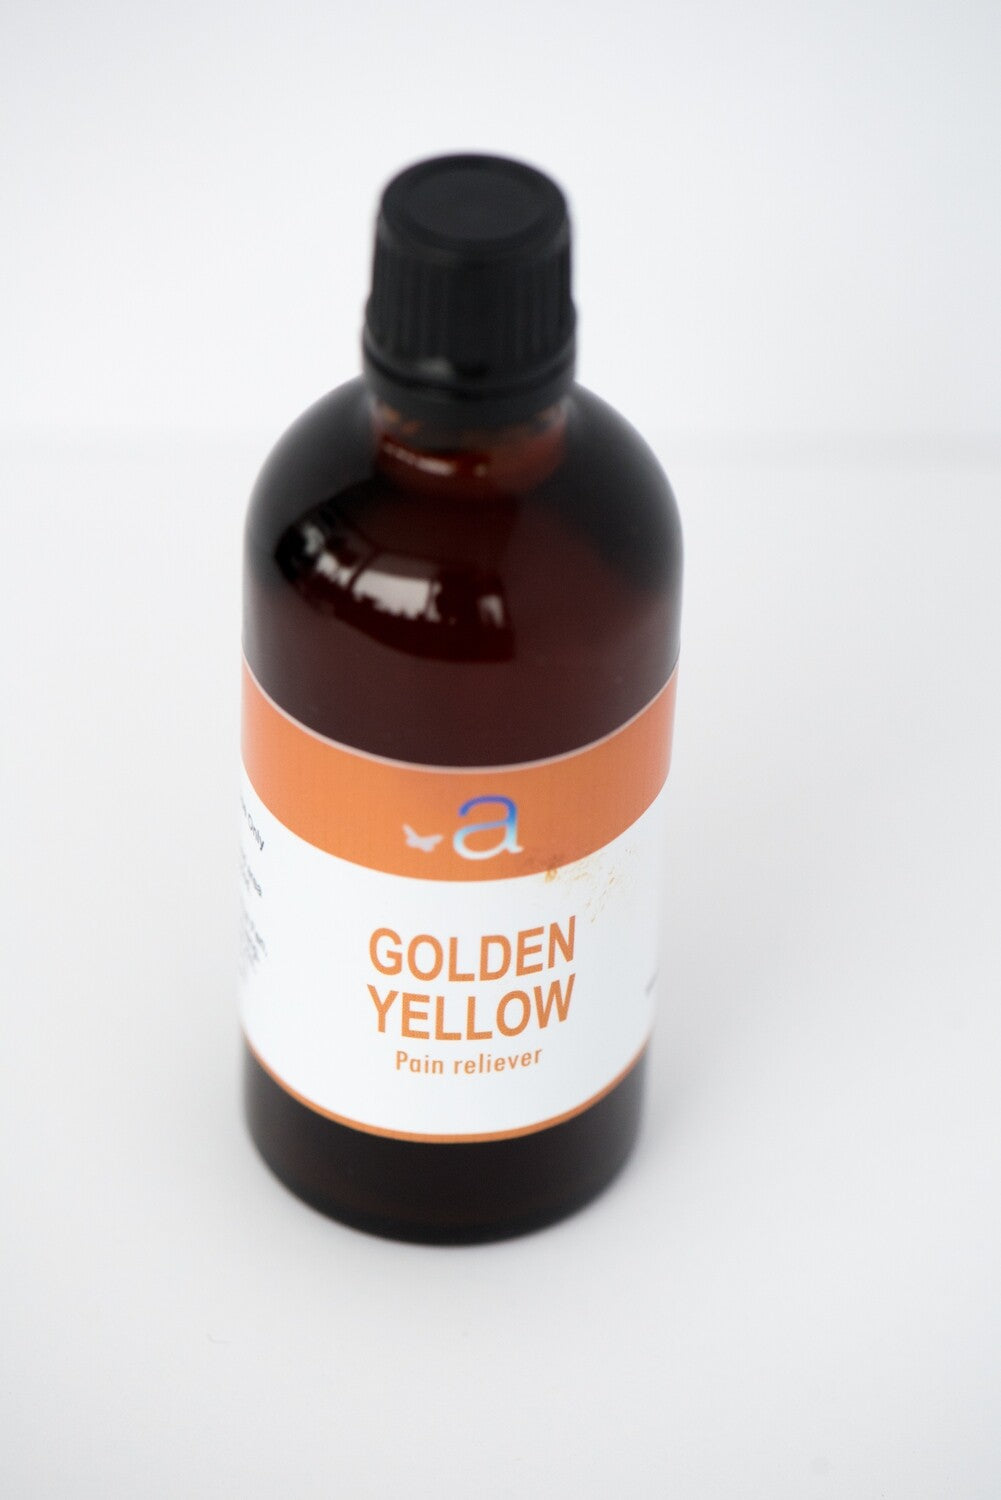 Herbal tinctures for pain relief - Golden Yellow Tincture